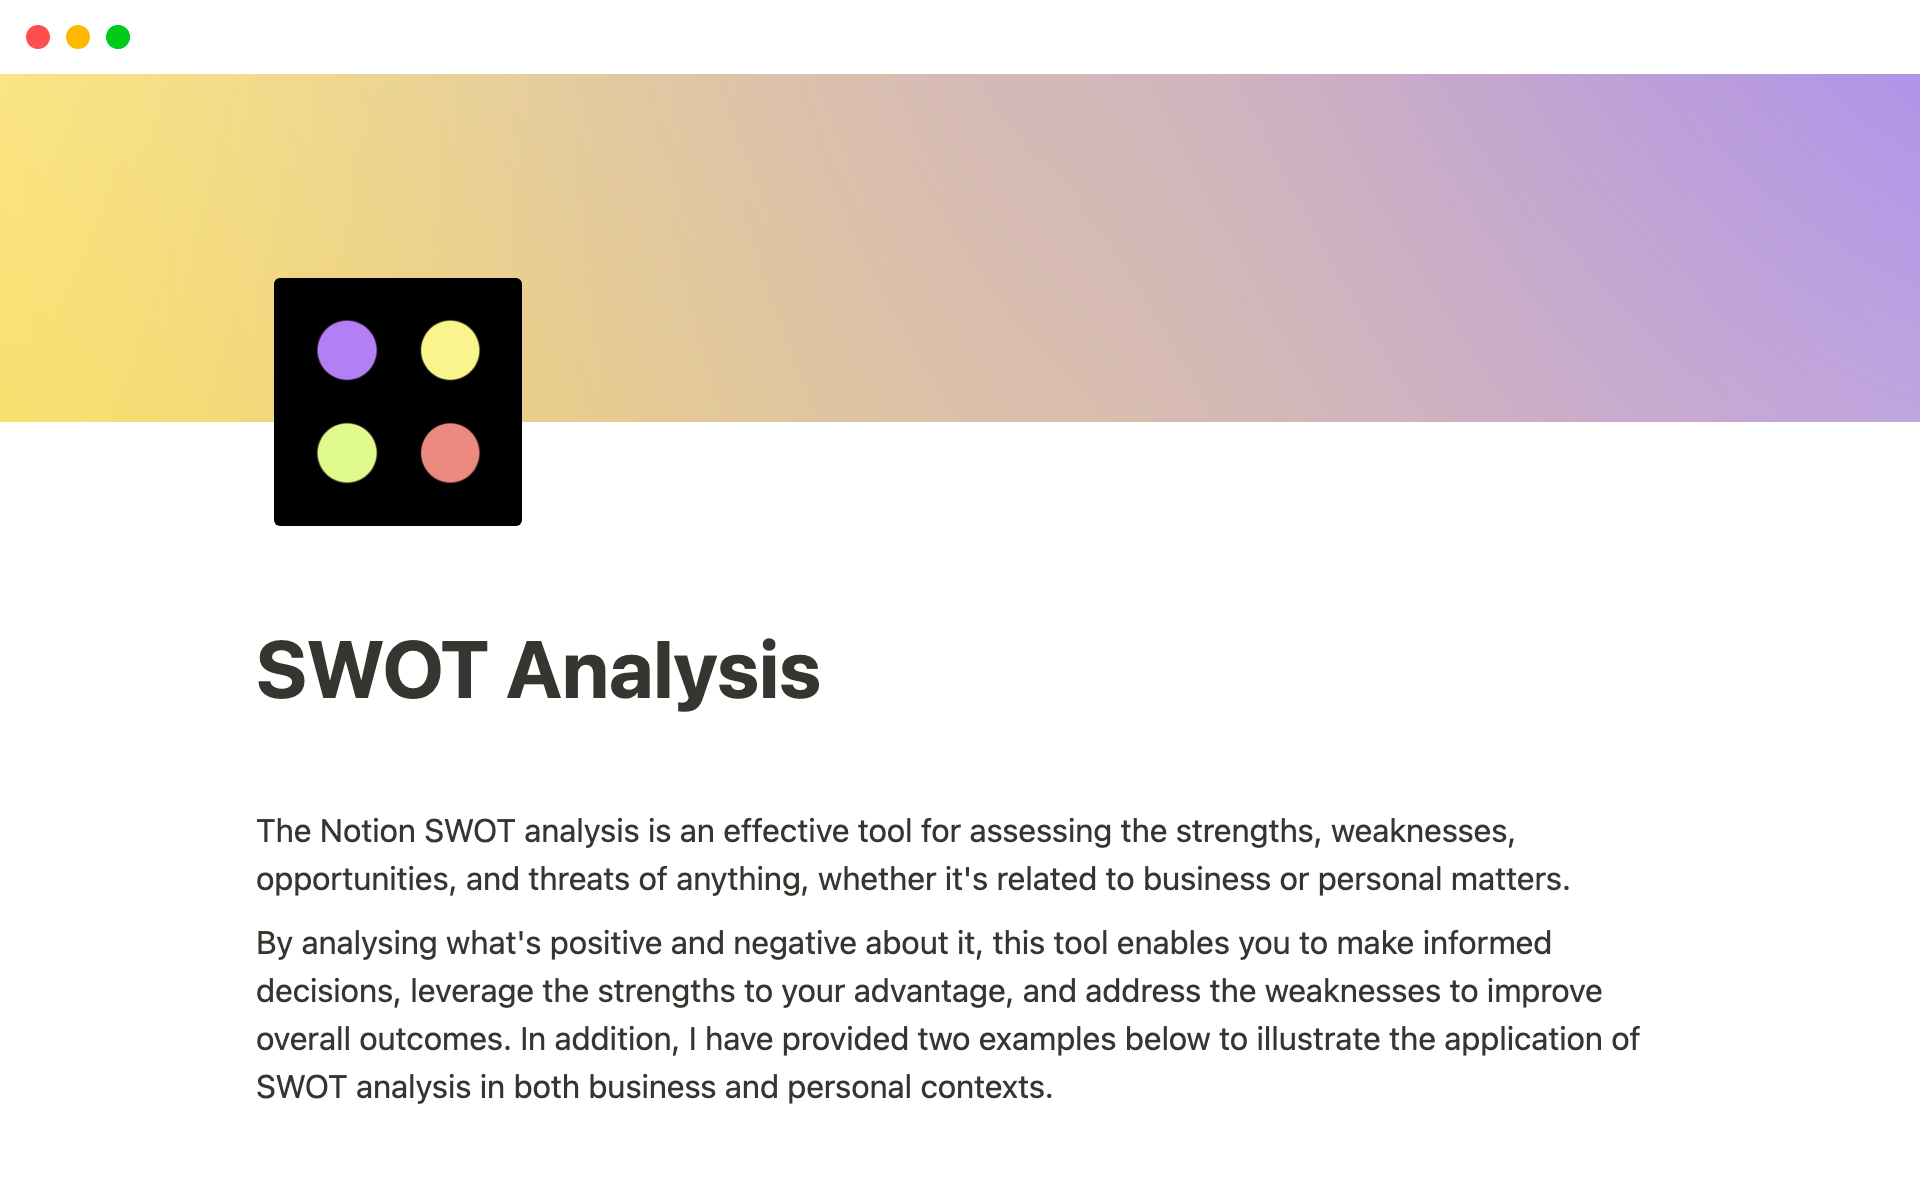 WOT analysis is an effective tool for assessing the strengths, weaknesses, opportunities, and threats of anything, whether it's related to business or personal matters.